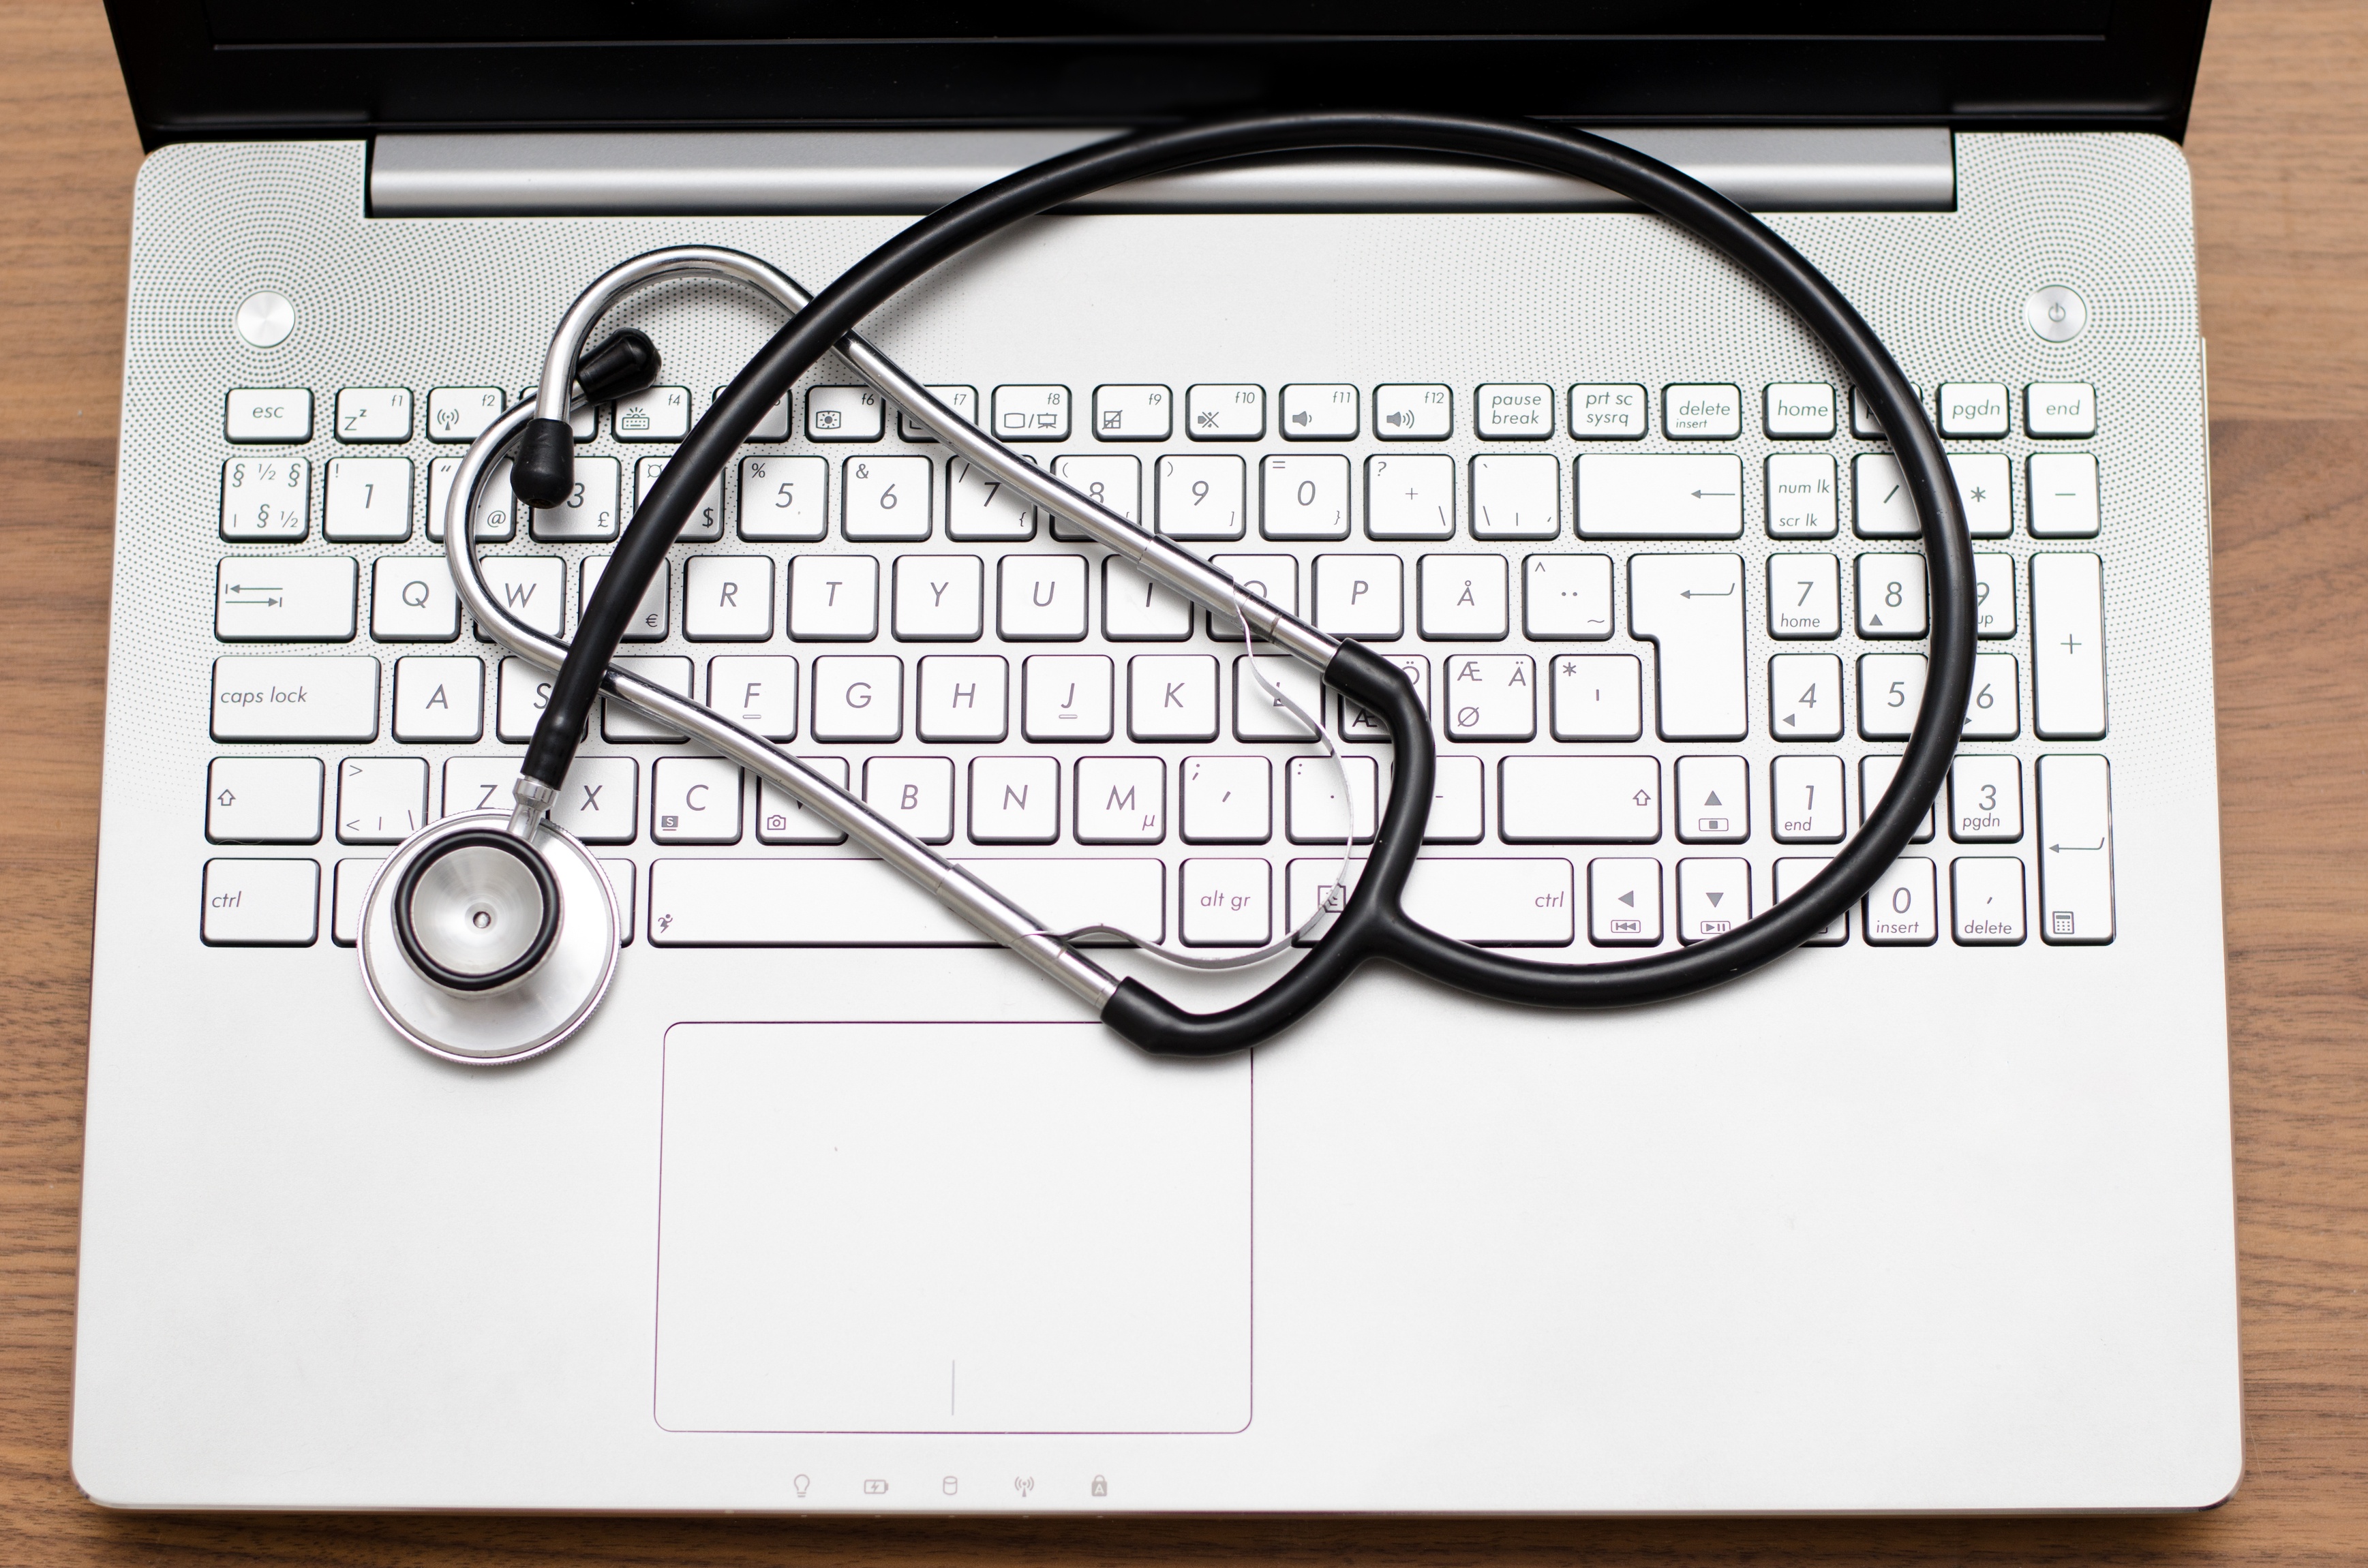 Top 5 Most Widely Used EHRs Named in Medscape EHR Report